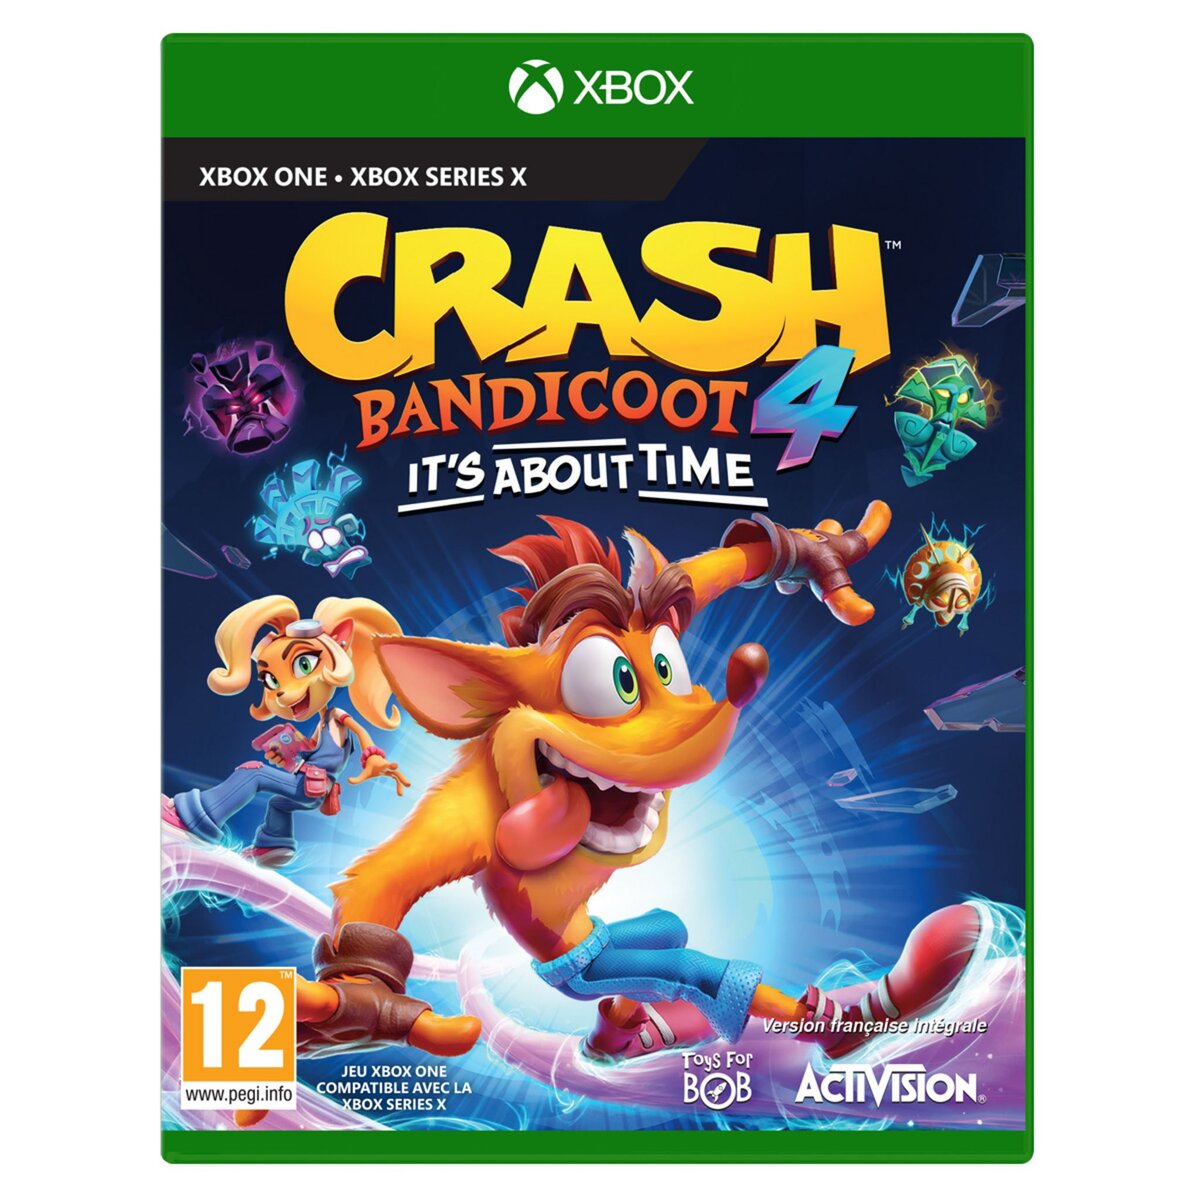 Crash Bandicoot 4 : It's About Time Xbox One